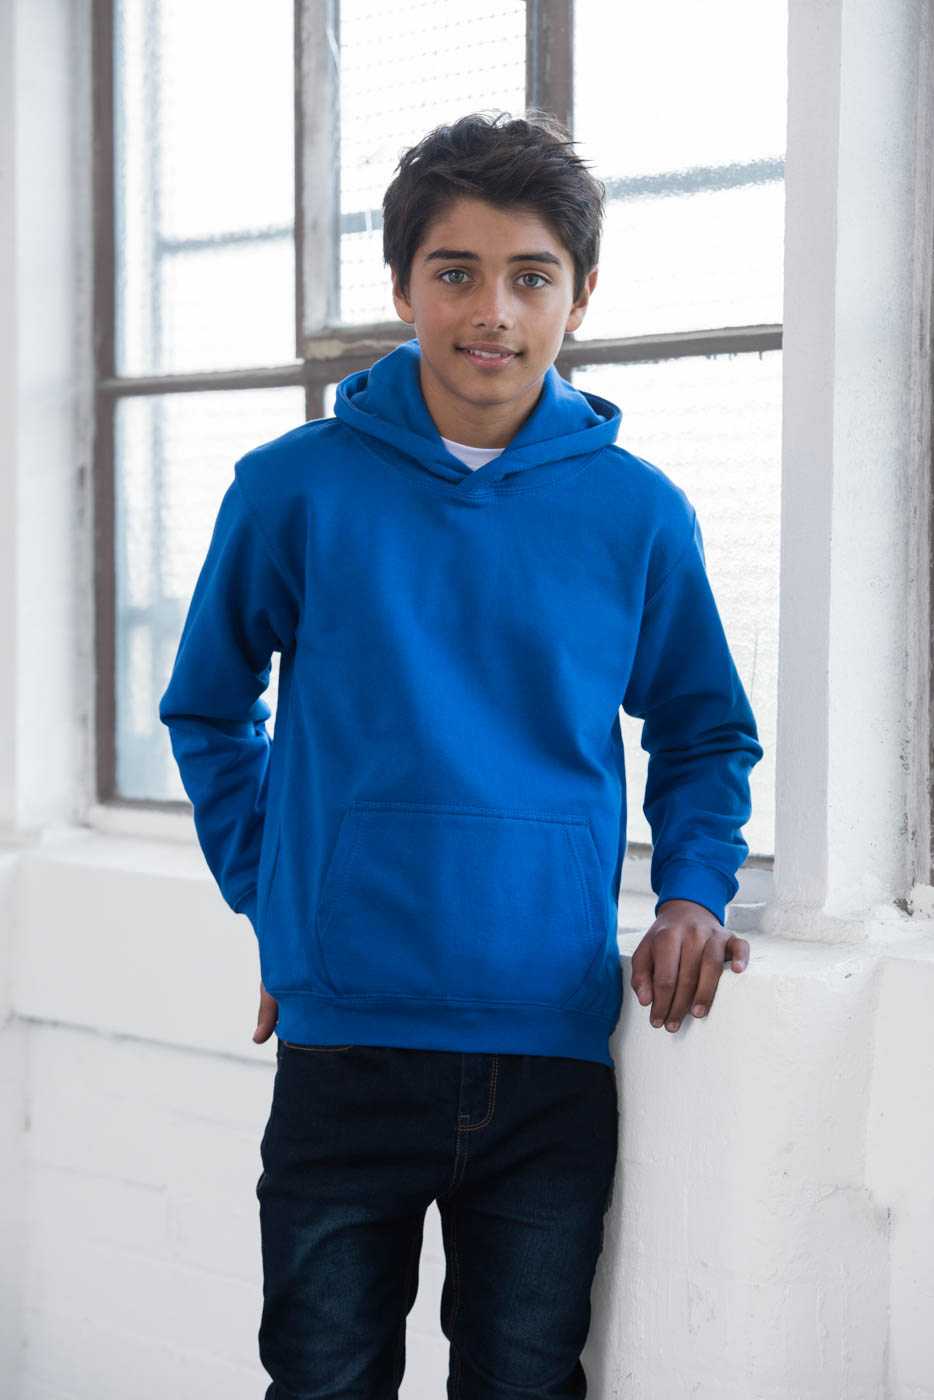 Just Hoods JHY001 Youth College Hoodie - Royal Blue - HIT a Double